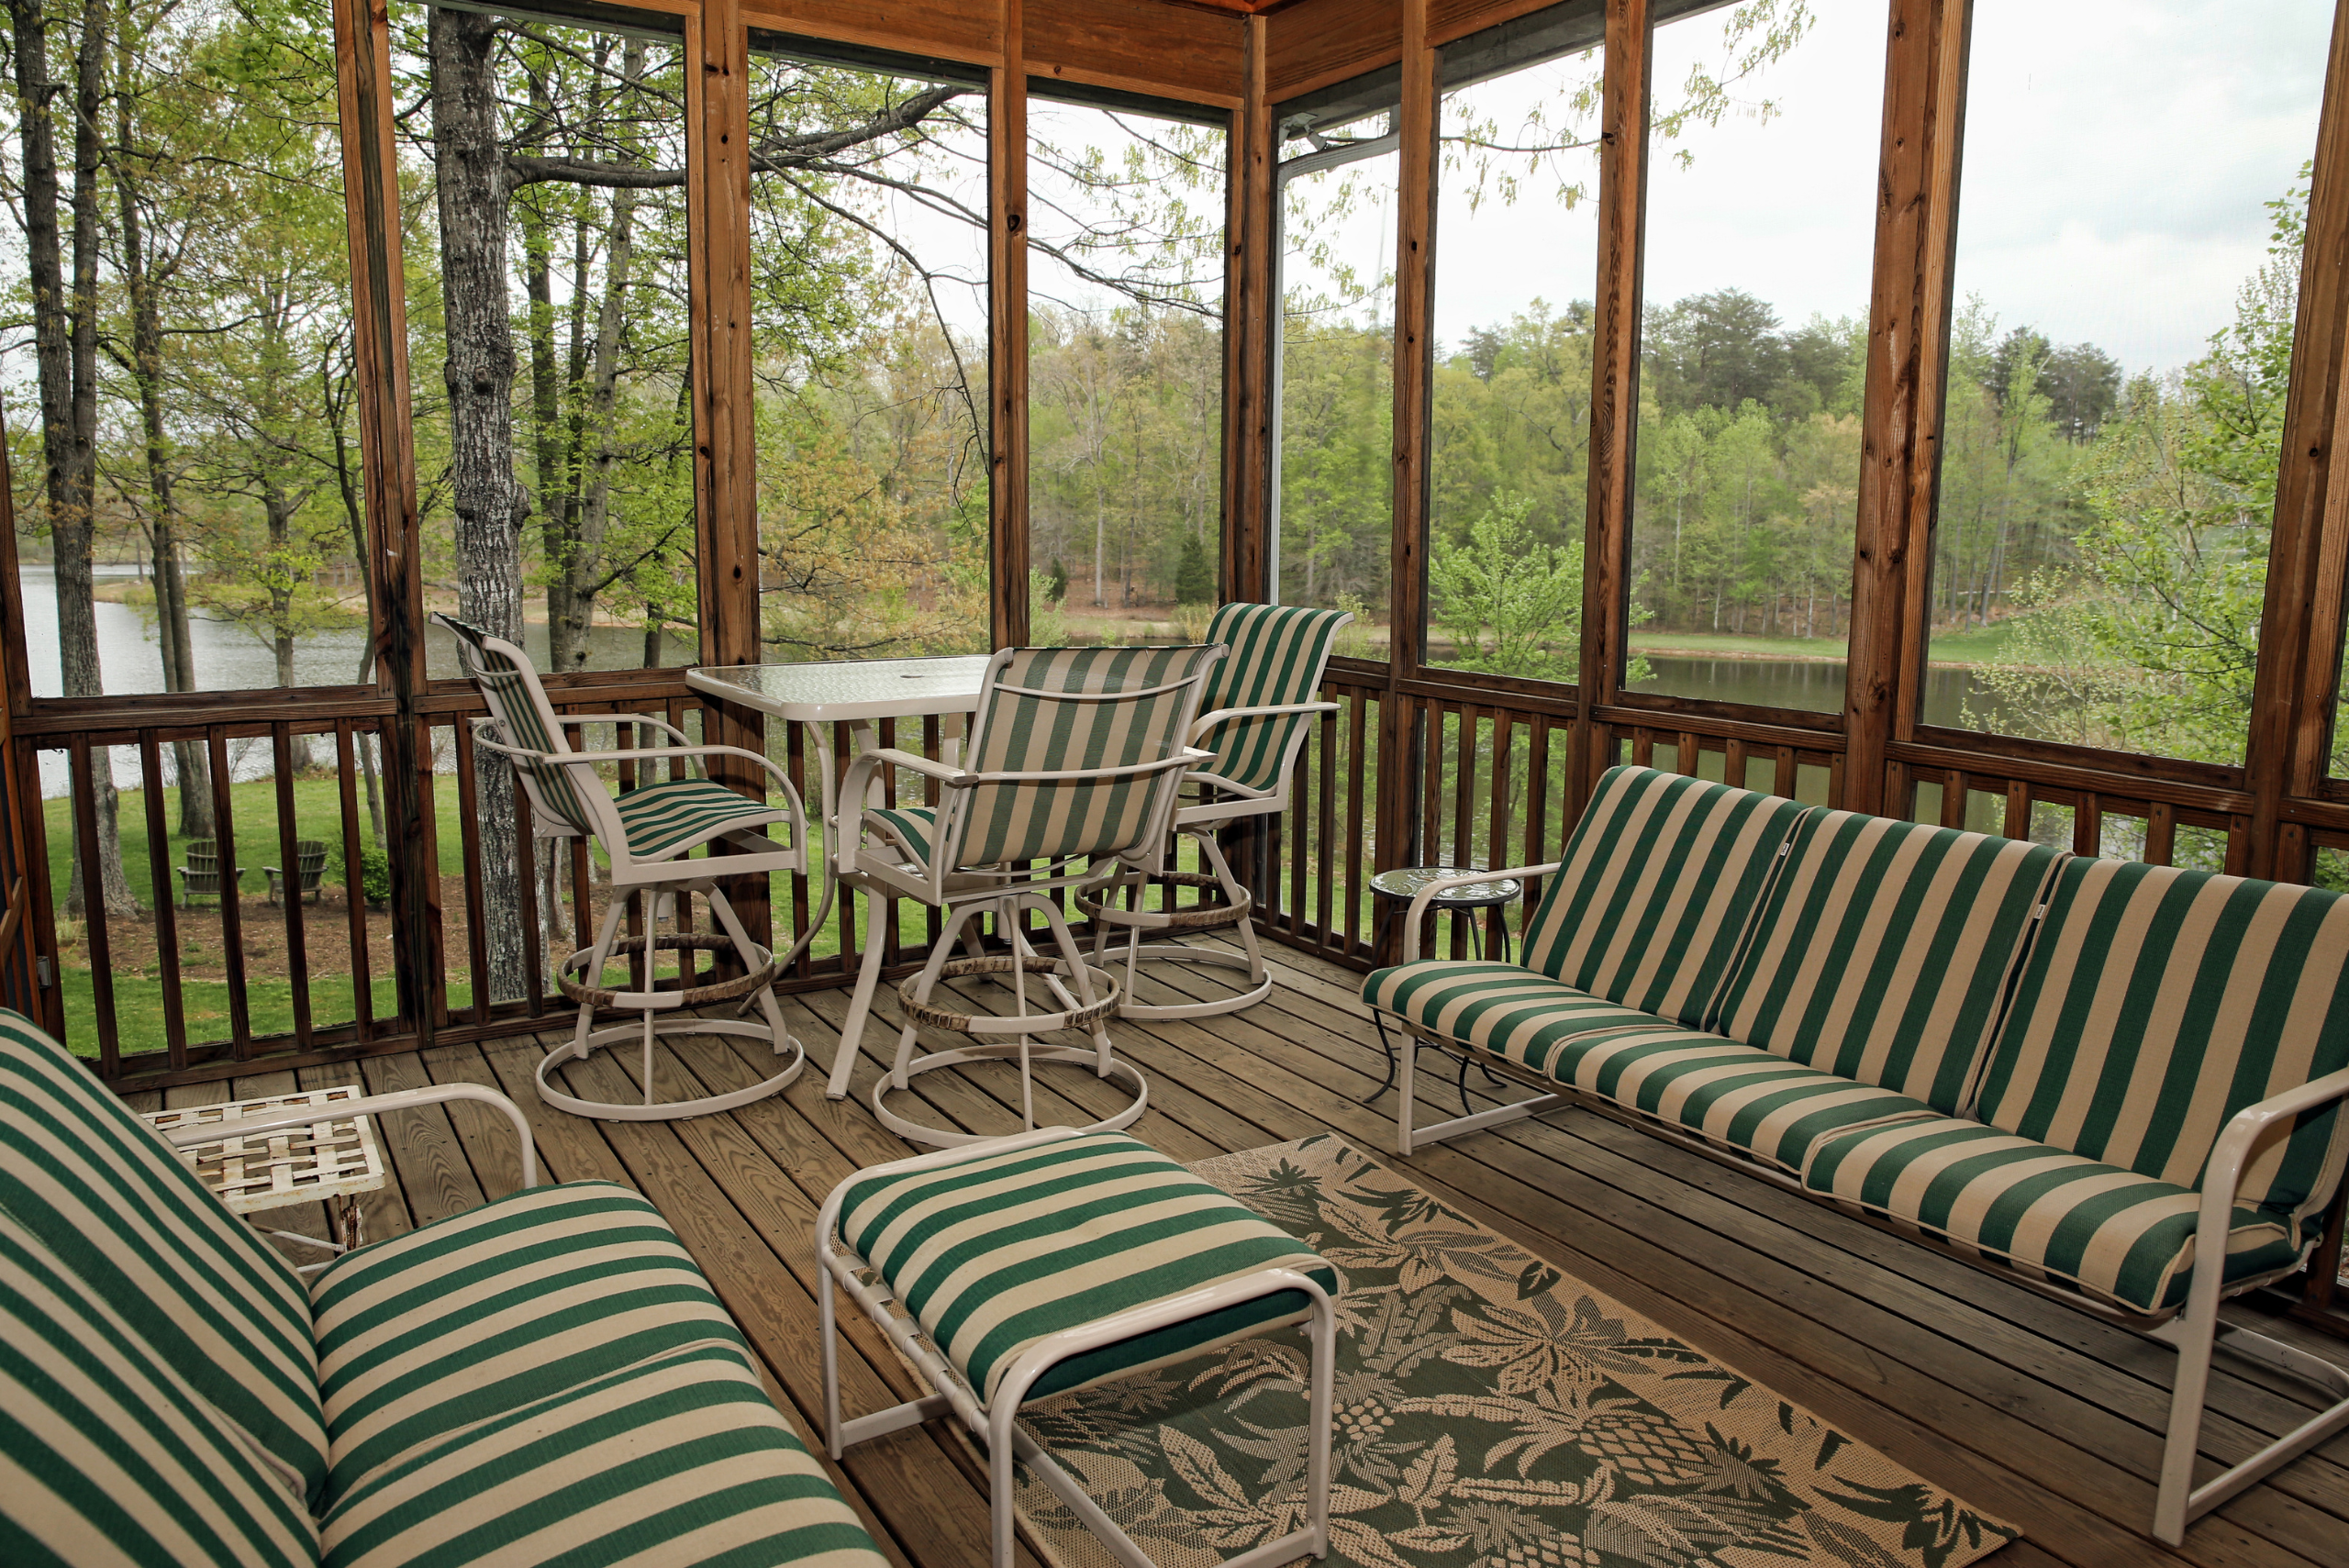 Striped furniture in a screened-in porch with wood framing.